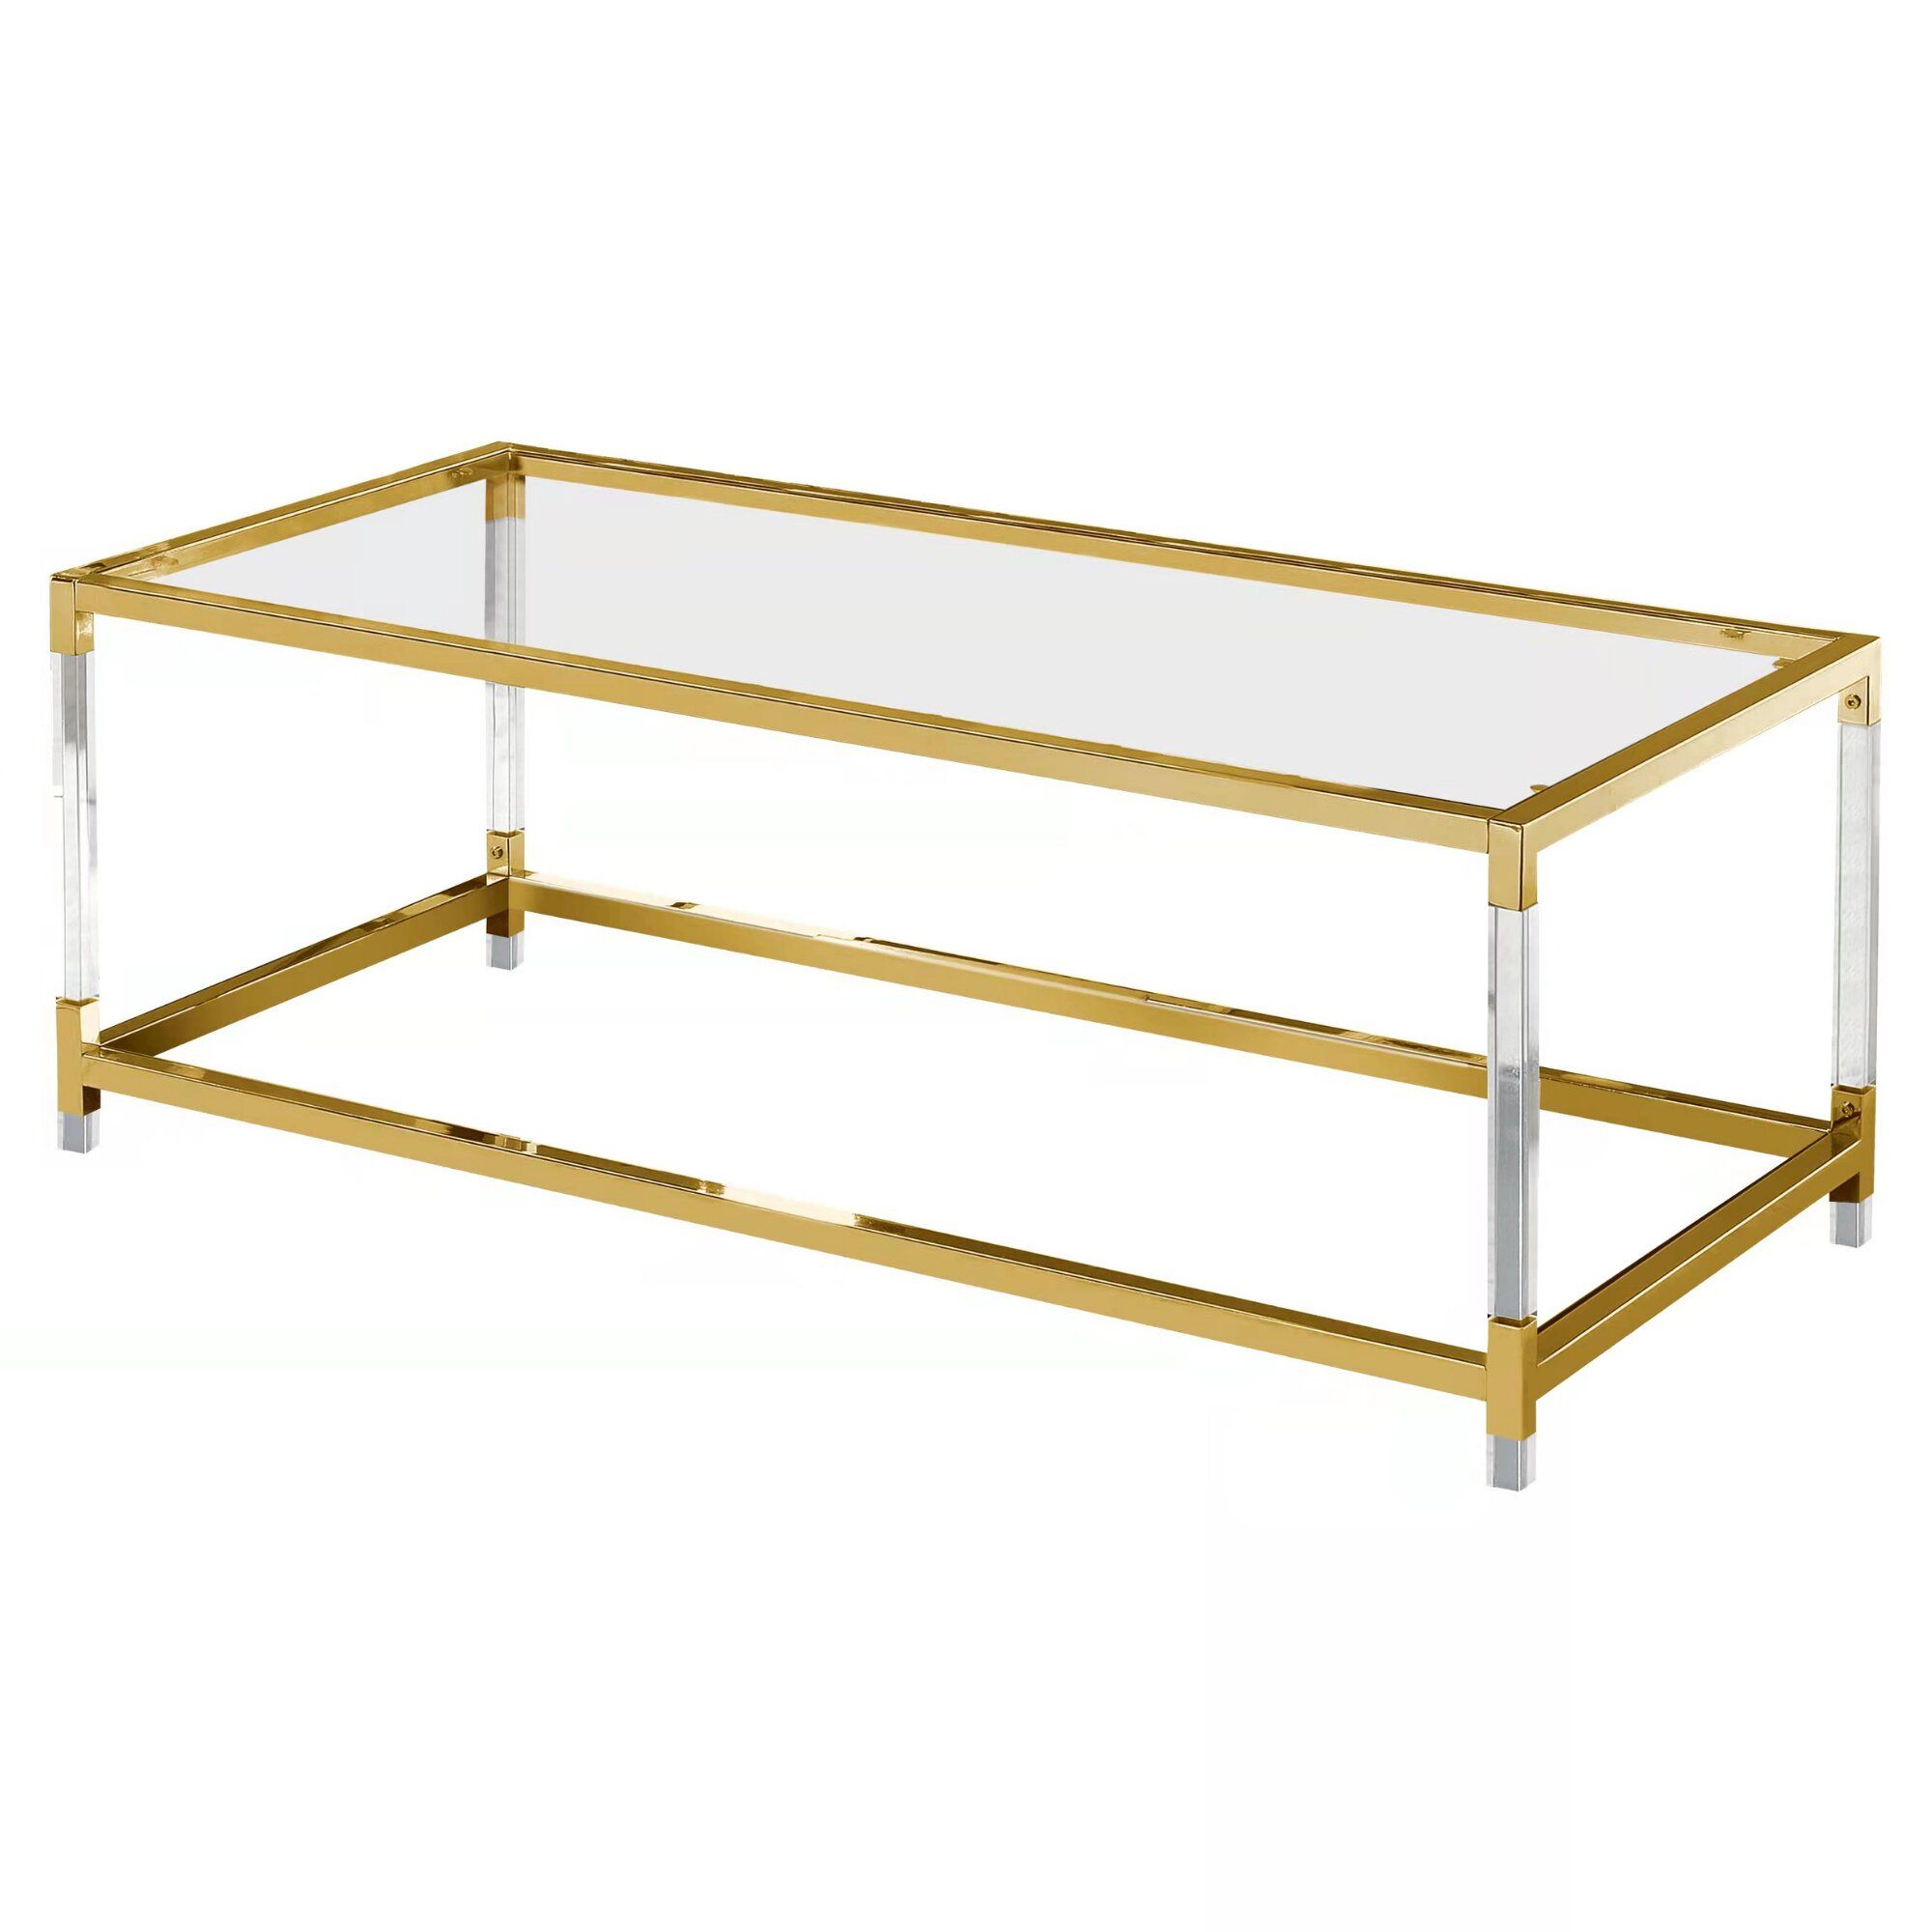 Everly Quinn Rectangle Acrylic Stainless Steel Coffee Table | Wayfair For Stainless Steel And Acrylic Coffee Tables (View 10 of 15)